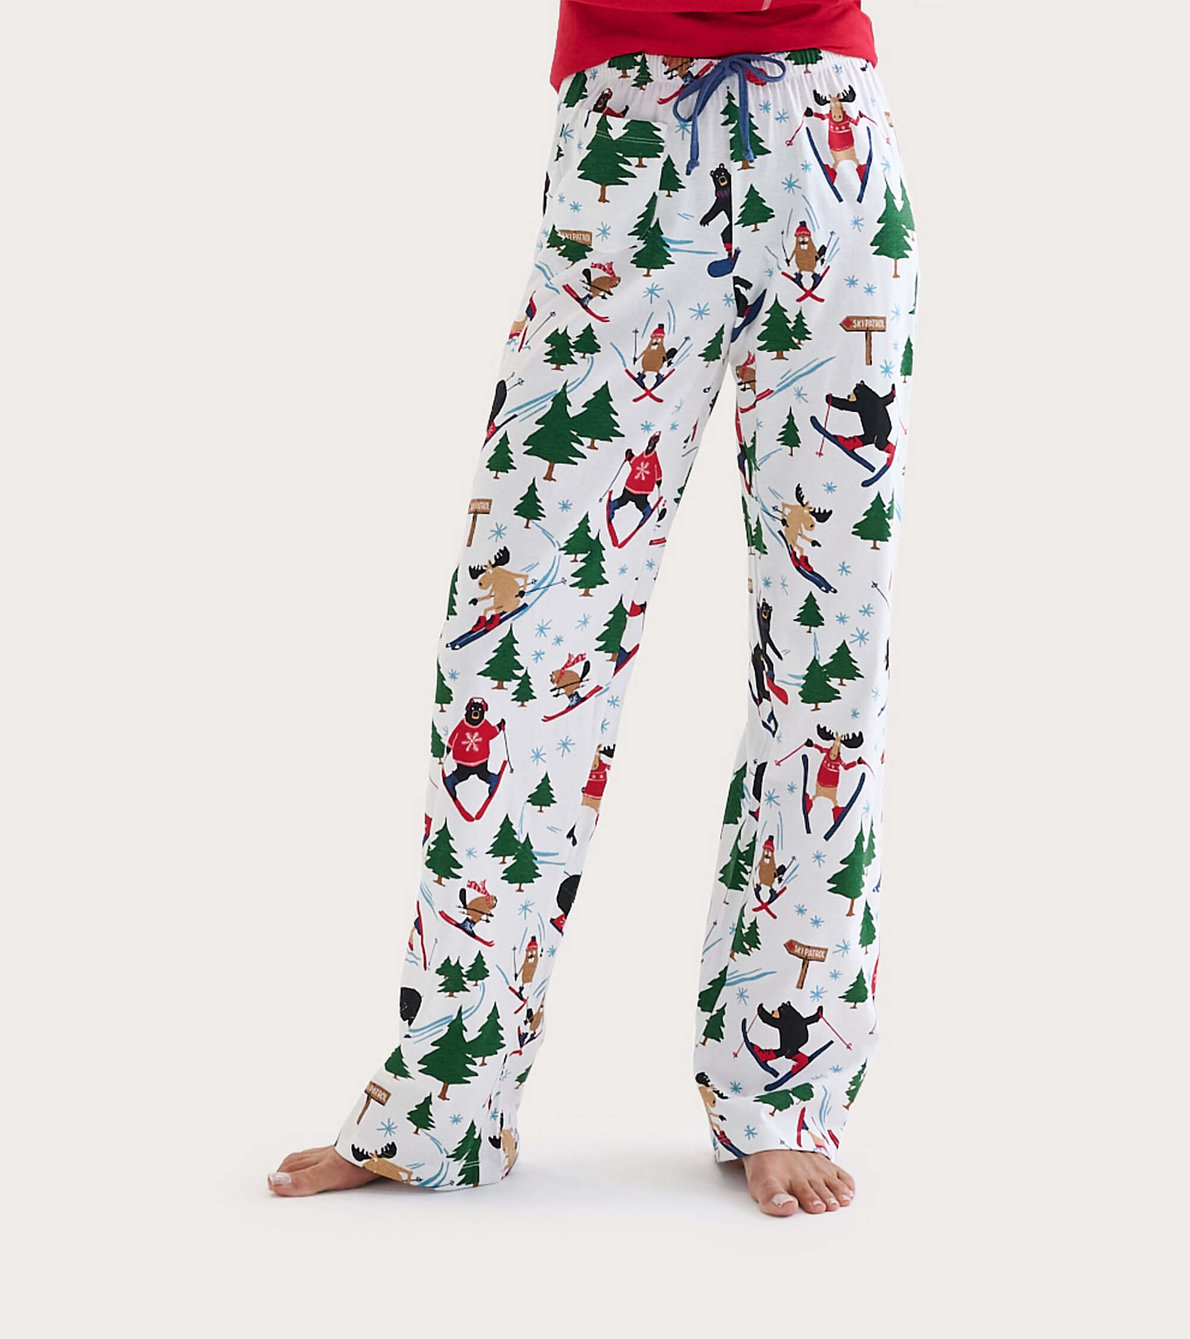 View larger image of Wild About Skiing Women's Jersey Pajama Pants